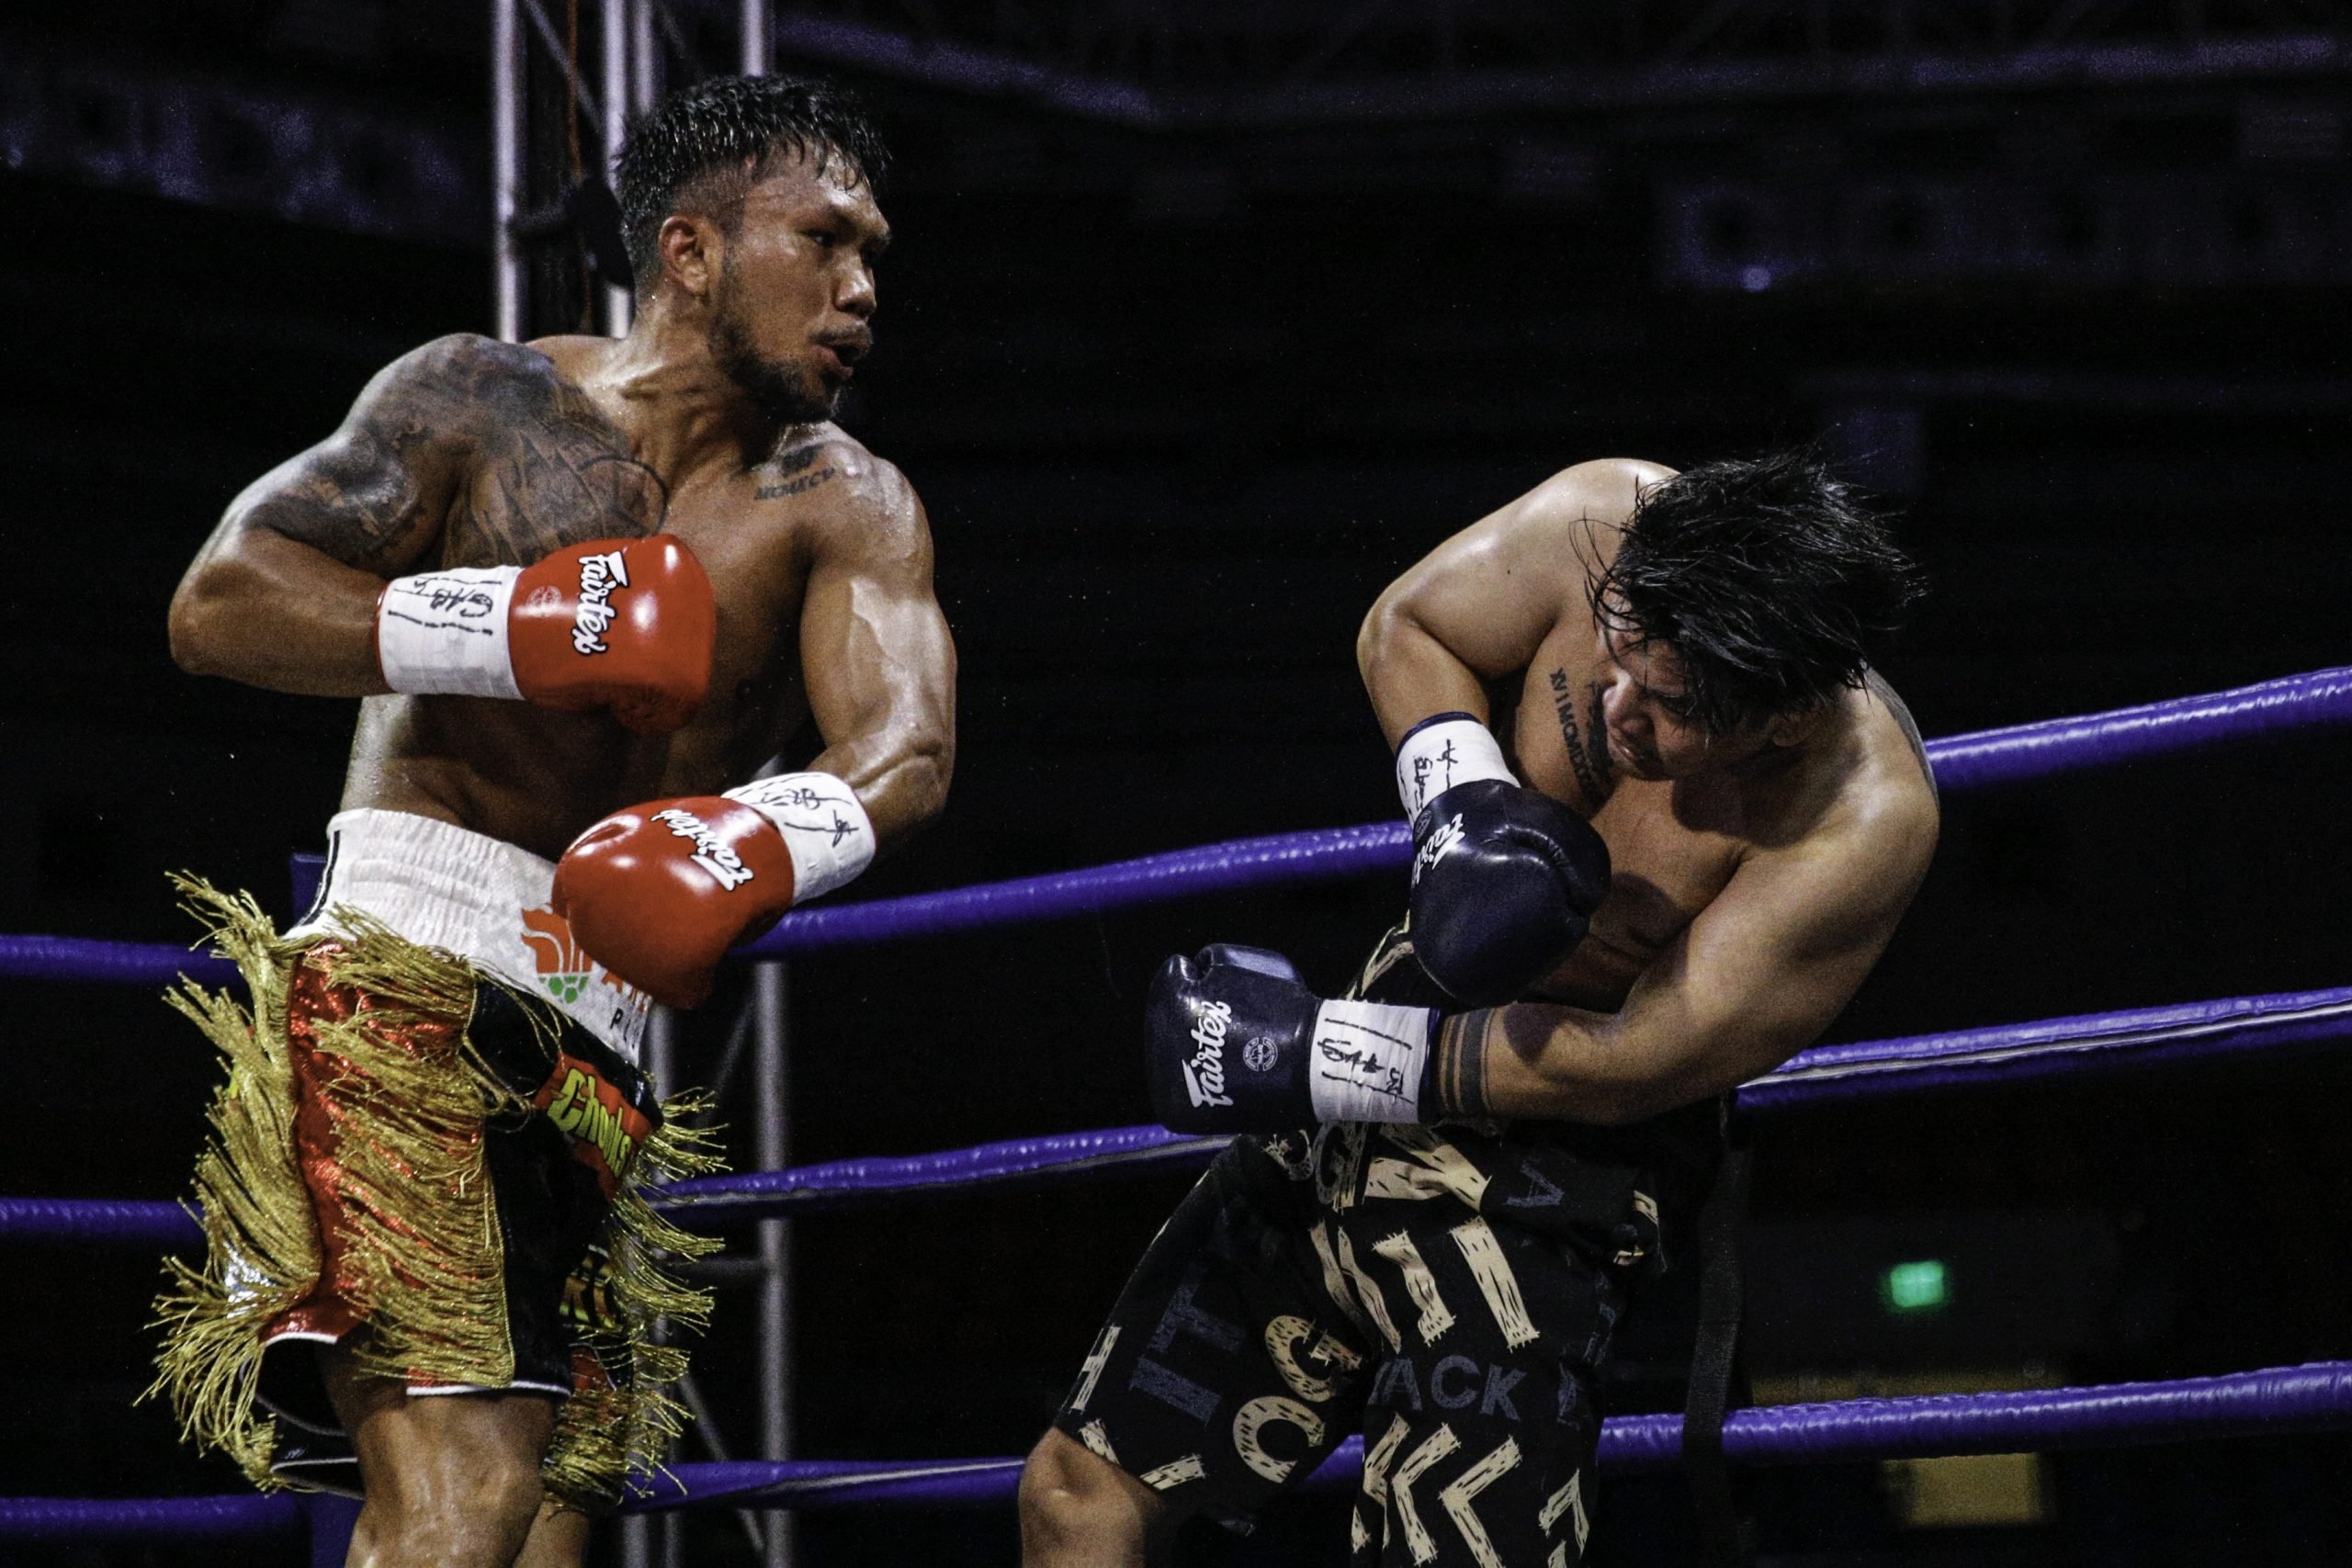 Eumir Marcial stays busy before Olympics with fourth round KO of Thoedsak Sinam - The Ring